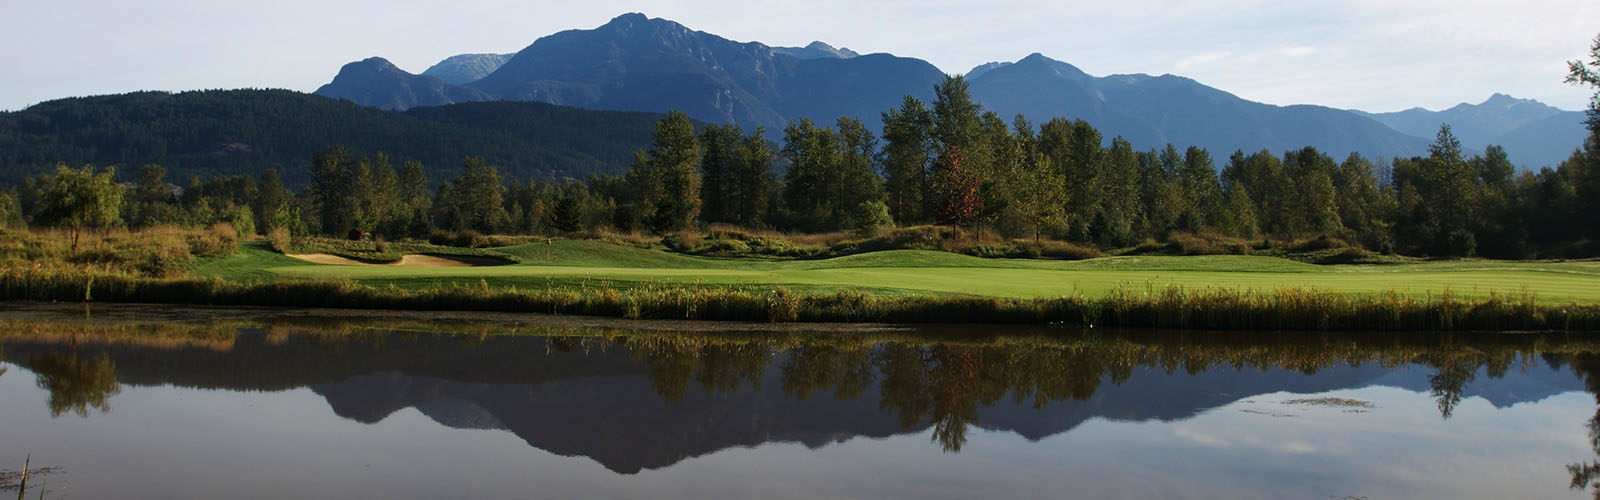 Big Sky Golf and Country Club, Canada